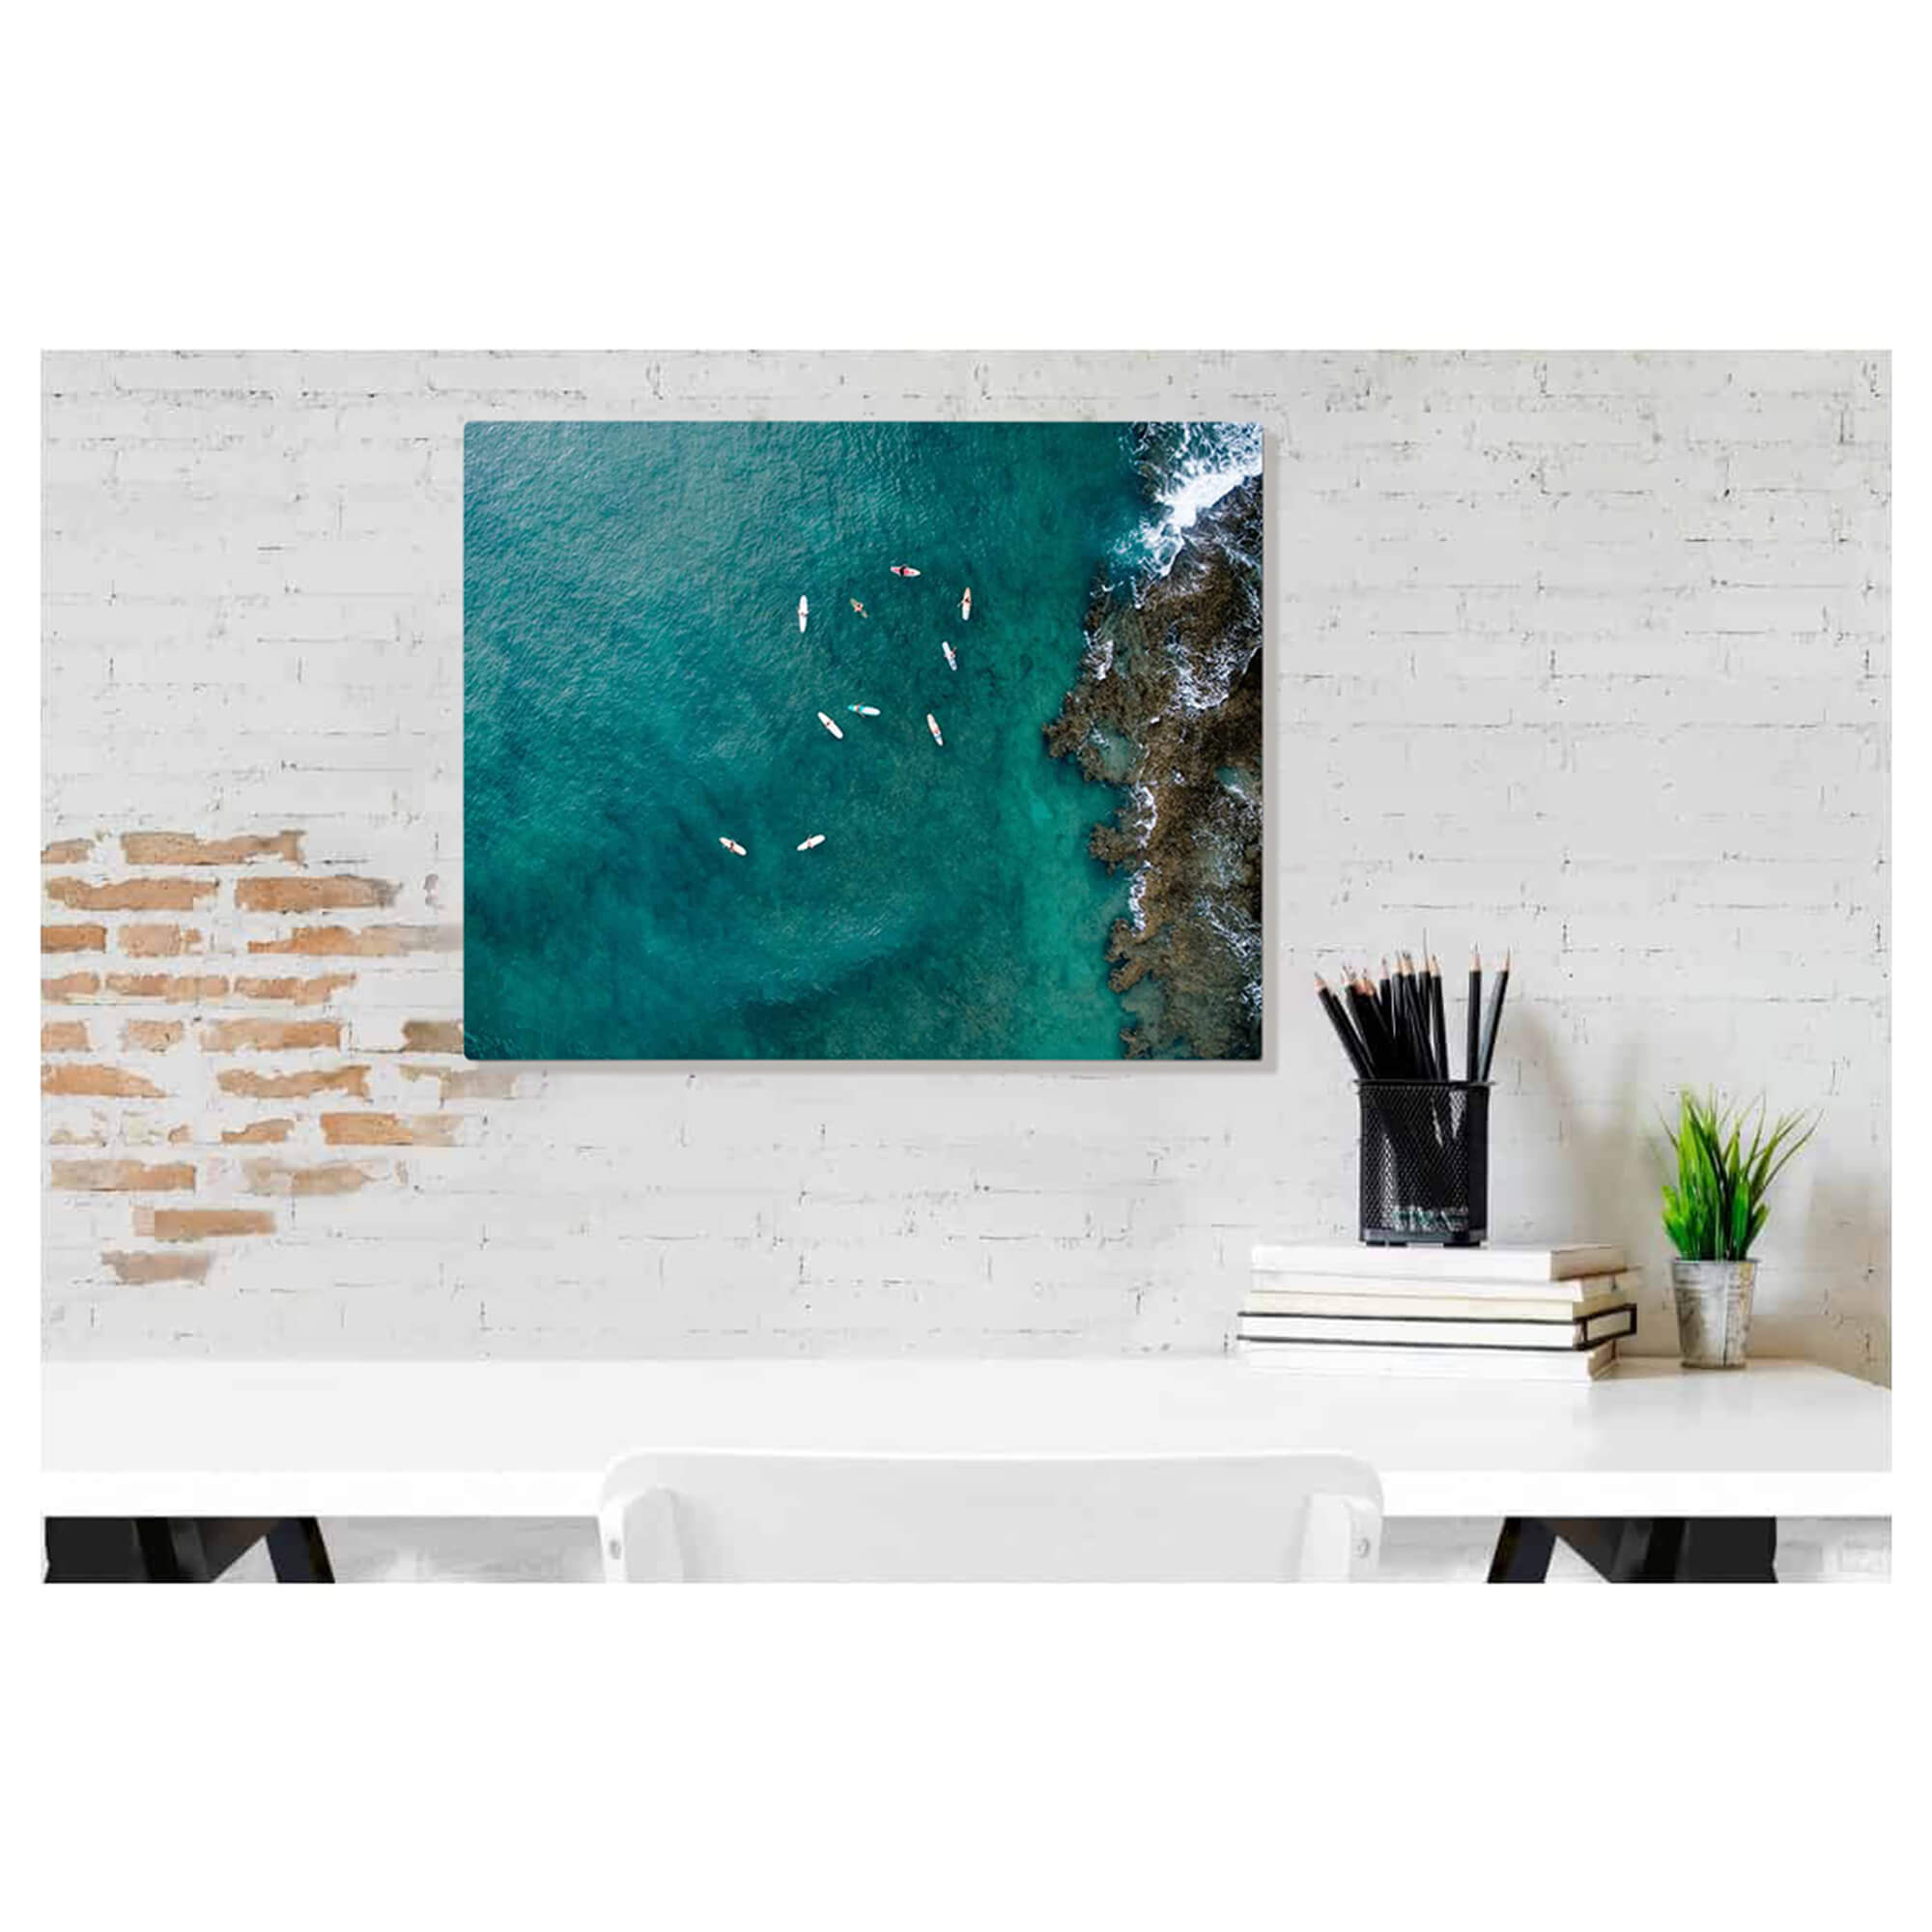 A metal art print of a drone photo of surfers near Turtle Bay on the North Shore of Oahu by Hawaii artist Bree Poort